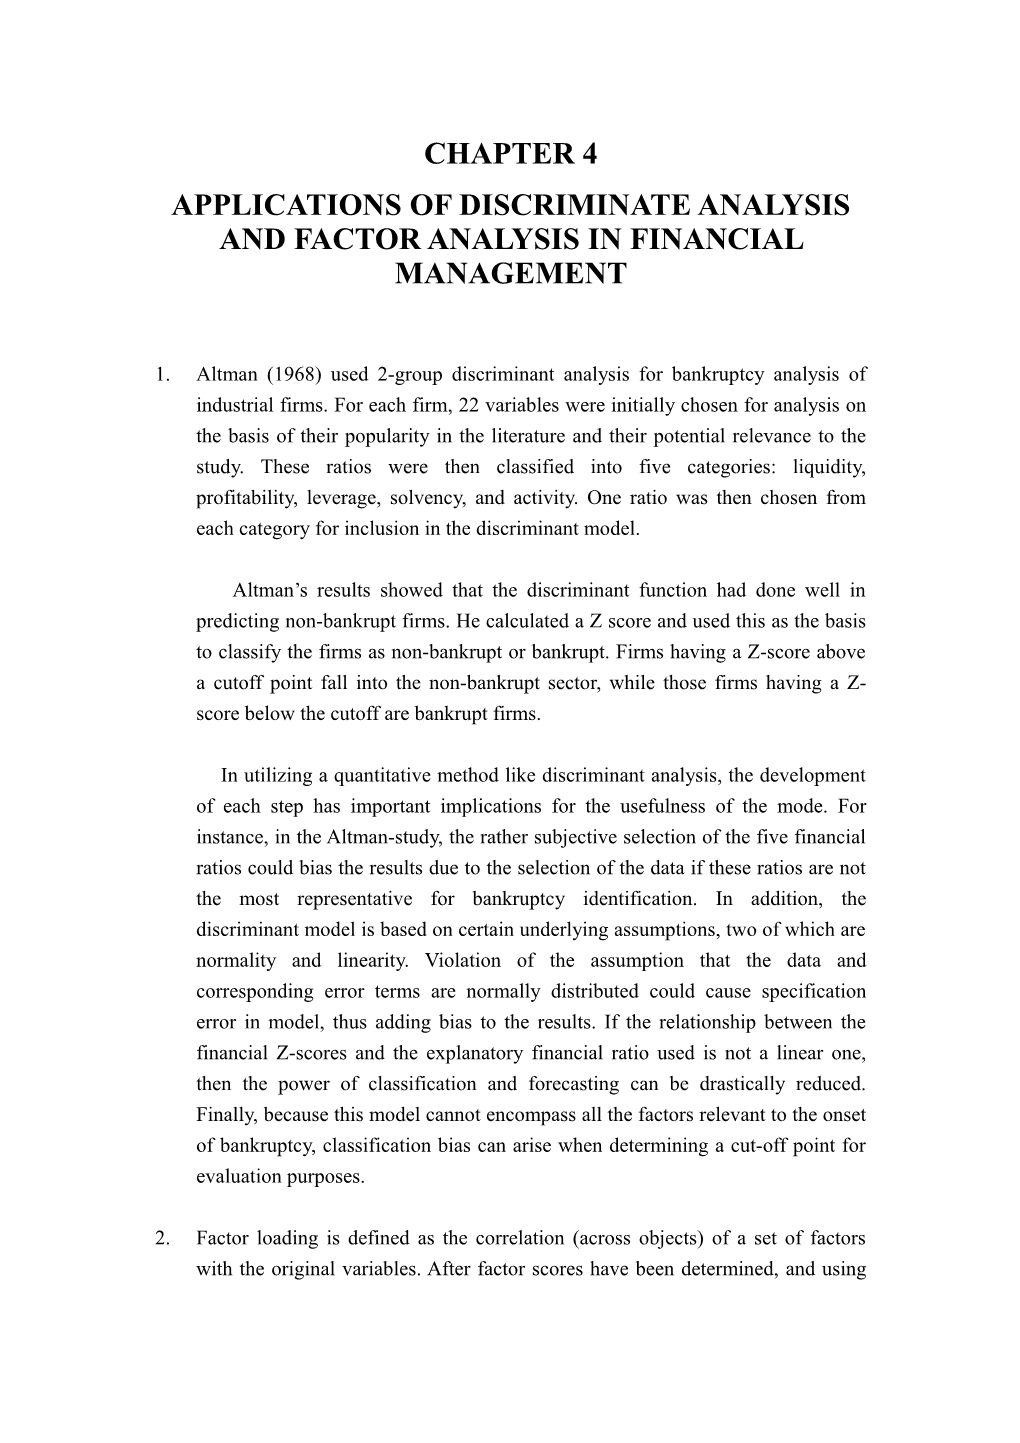 Applications of Discriminate Analysis and Factor Analysis in Financial Management